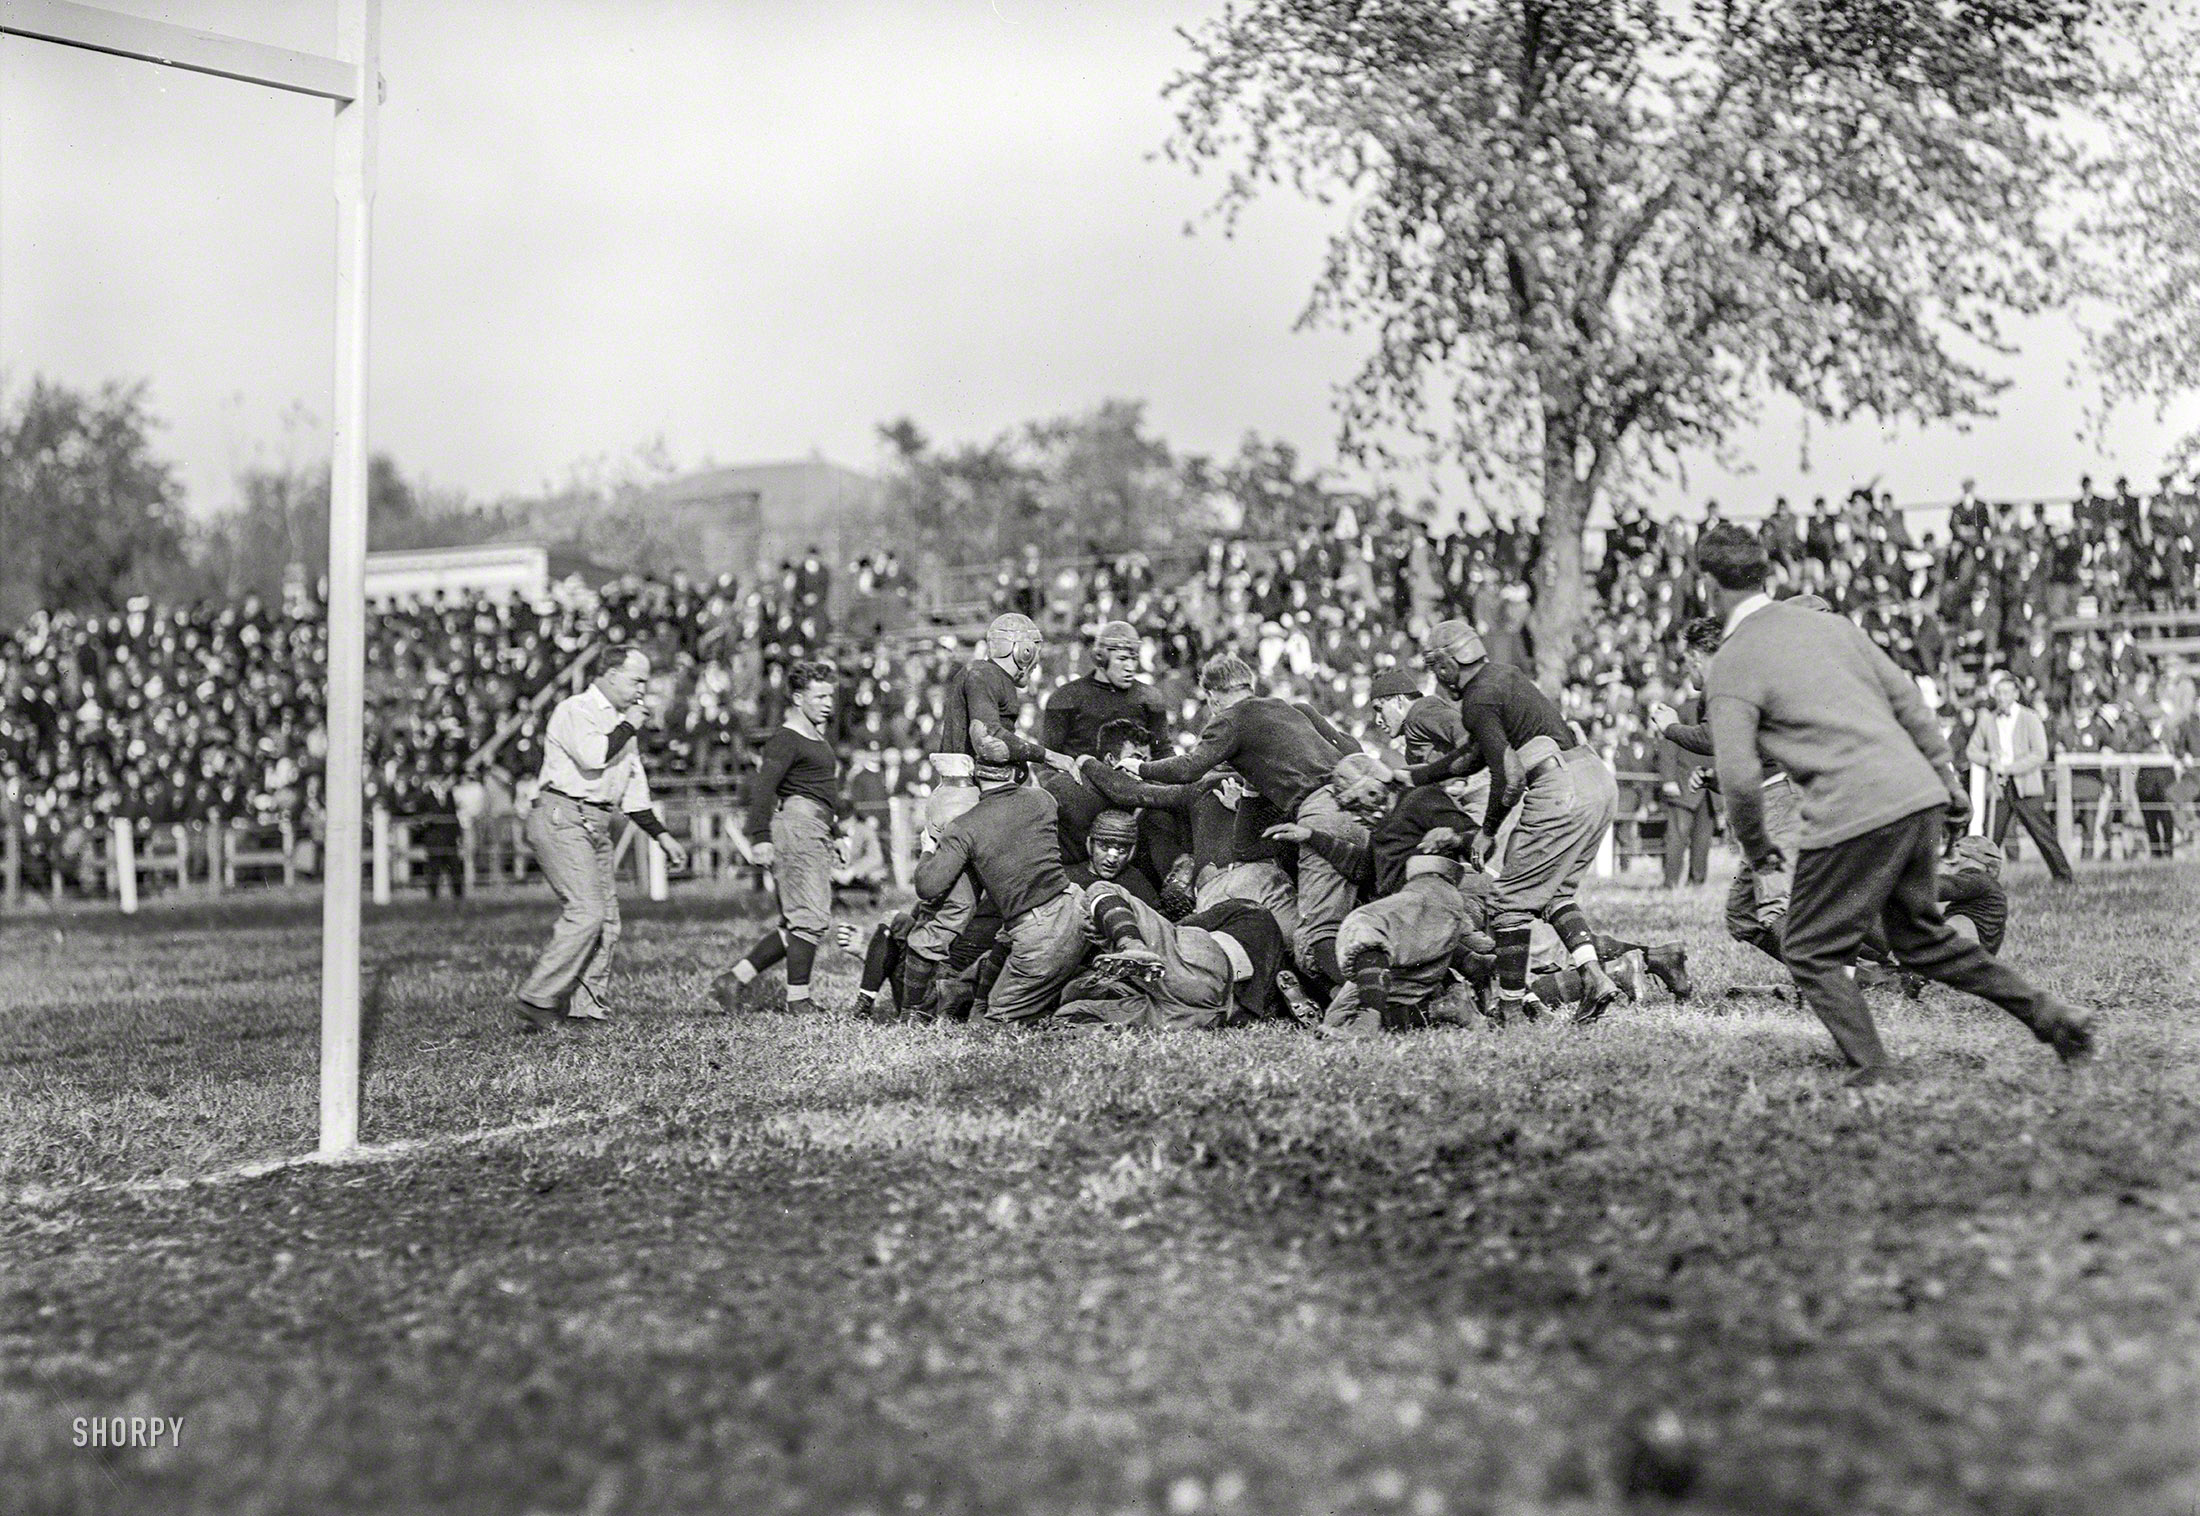 &nbsp; &nbsp; &nbsp; &nbsp; UPDATE: That's legendary athlete Jim Thorpe standing in the middle of the pile.
Washington, D.C., 1912. "Football -- Georgetown-Carlisle game; Glenn Warner." The College Football Hall of Famer who was coach of the Carlisle (Pa.) Indian Industrial School. Harris & Ewing Collection glass negative. View full size.